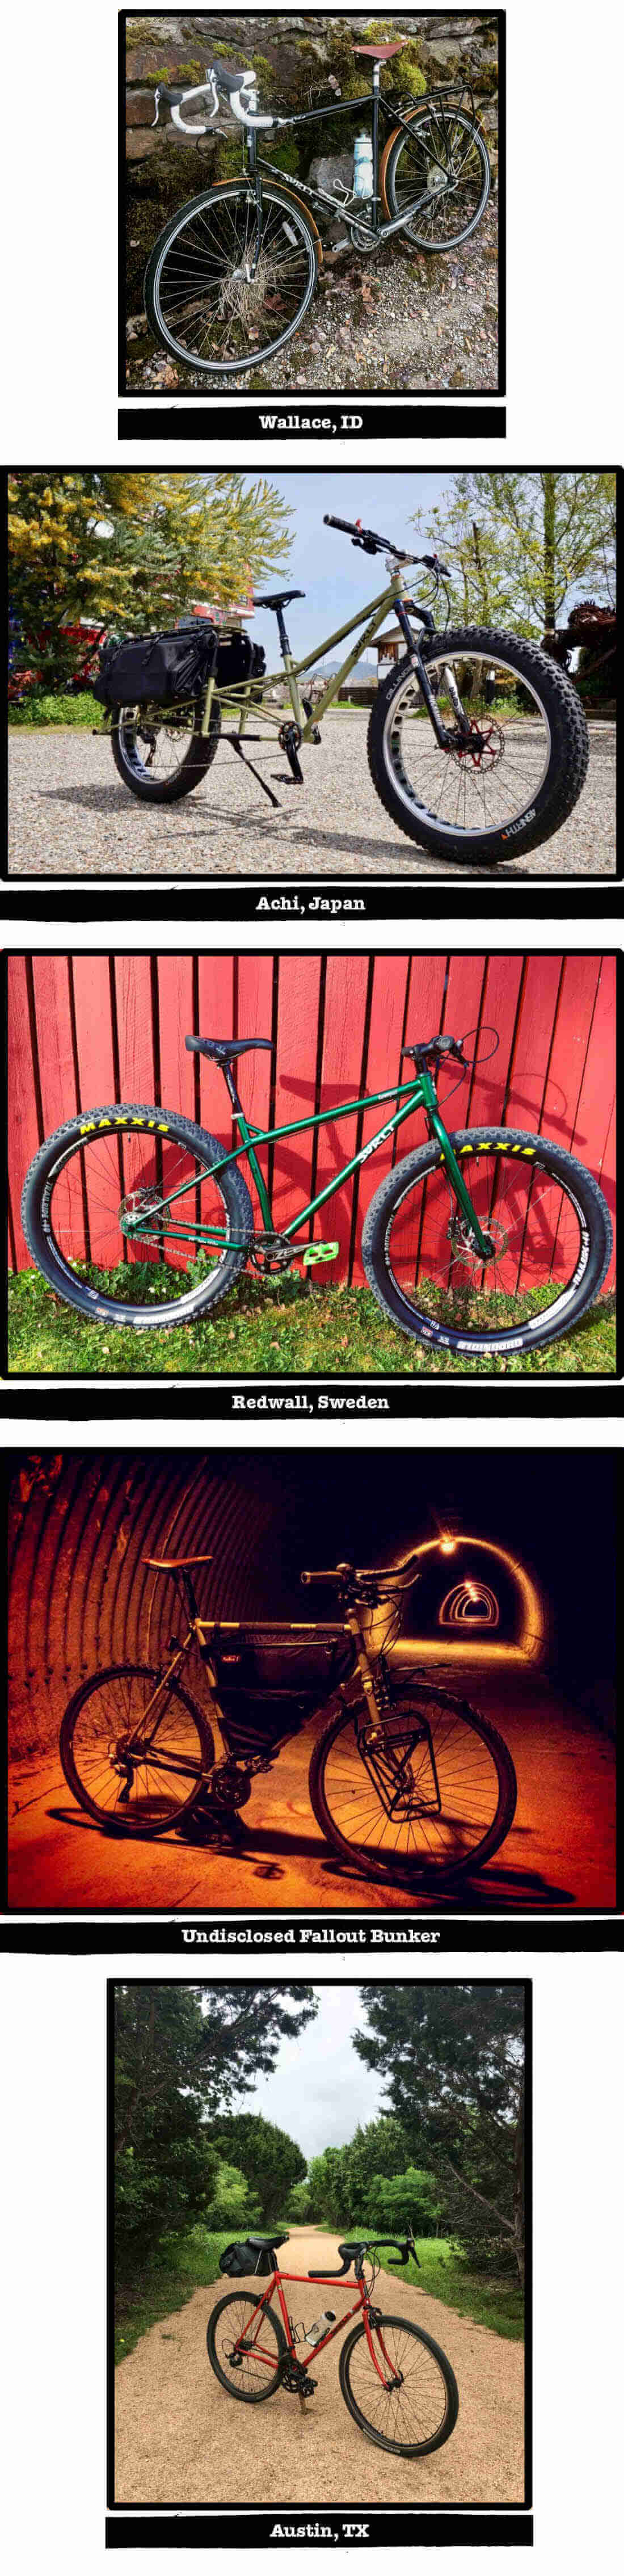 Multiple images of Surly bikes, with tags of their specific location listed below each image